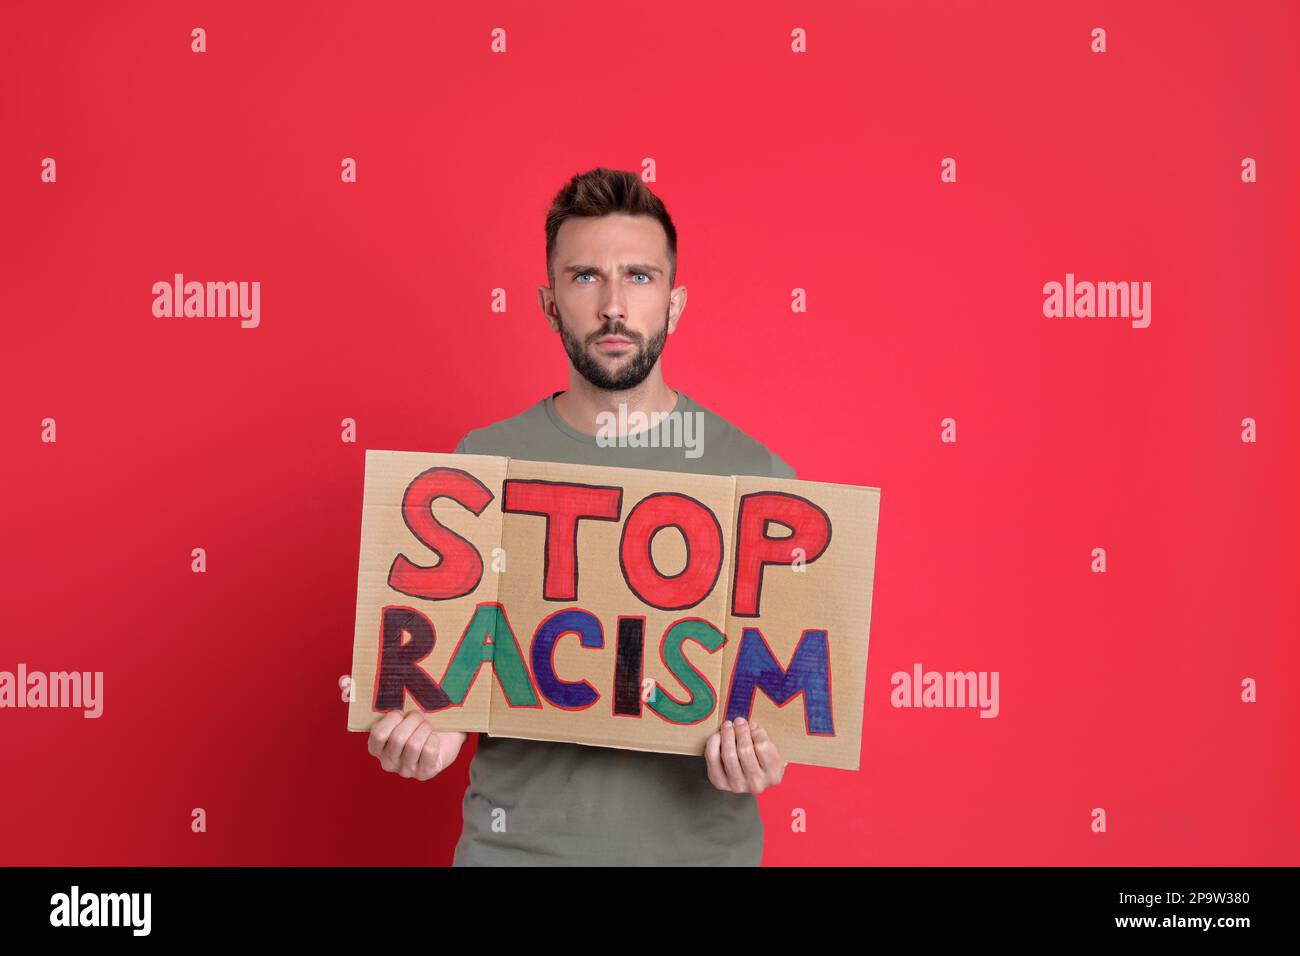 Man holding sign with phrase Stop Racism on red background Stock Photo